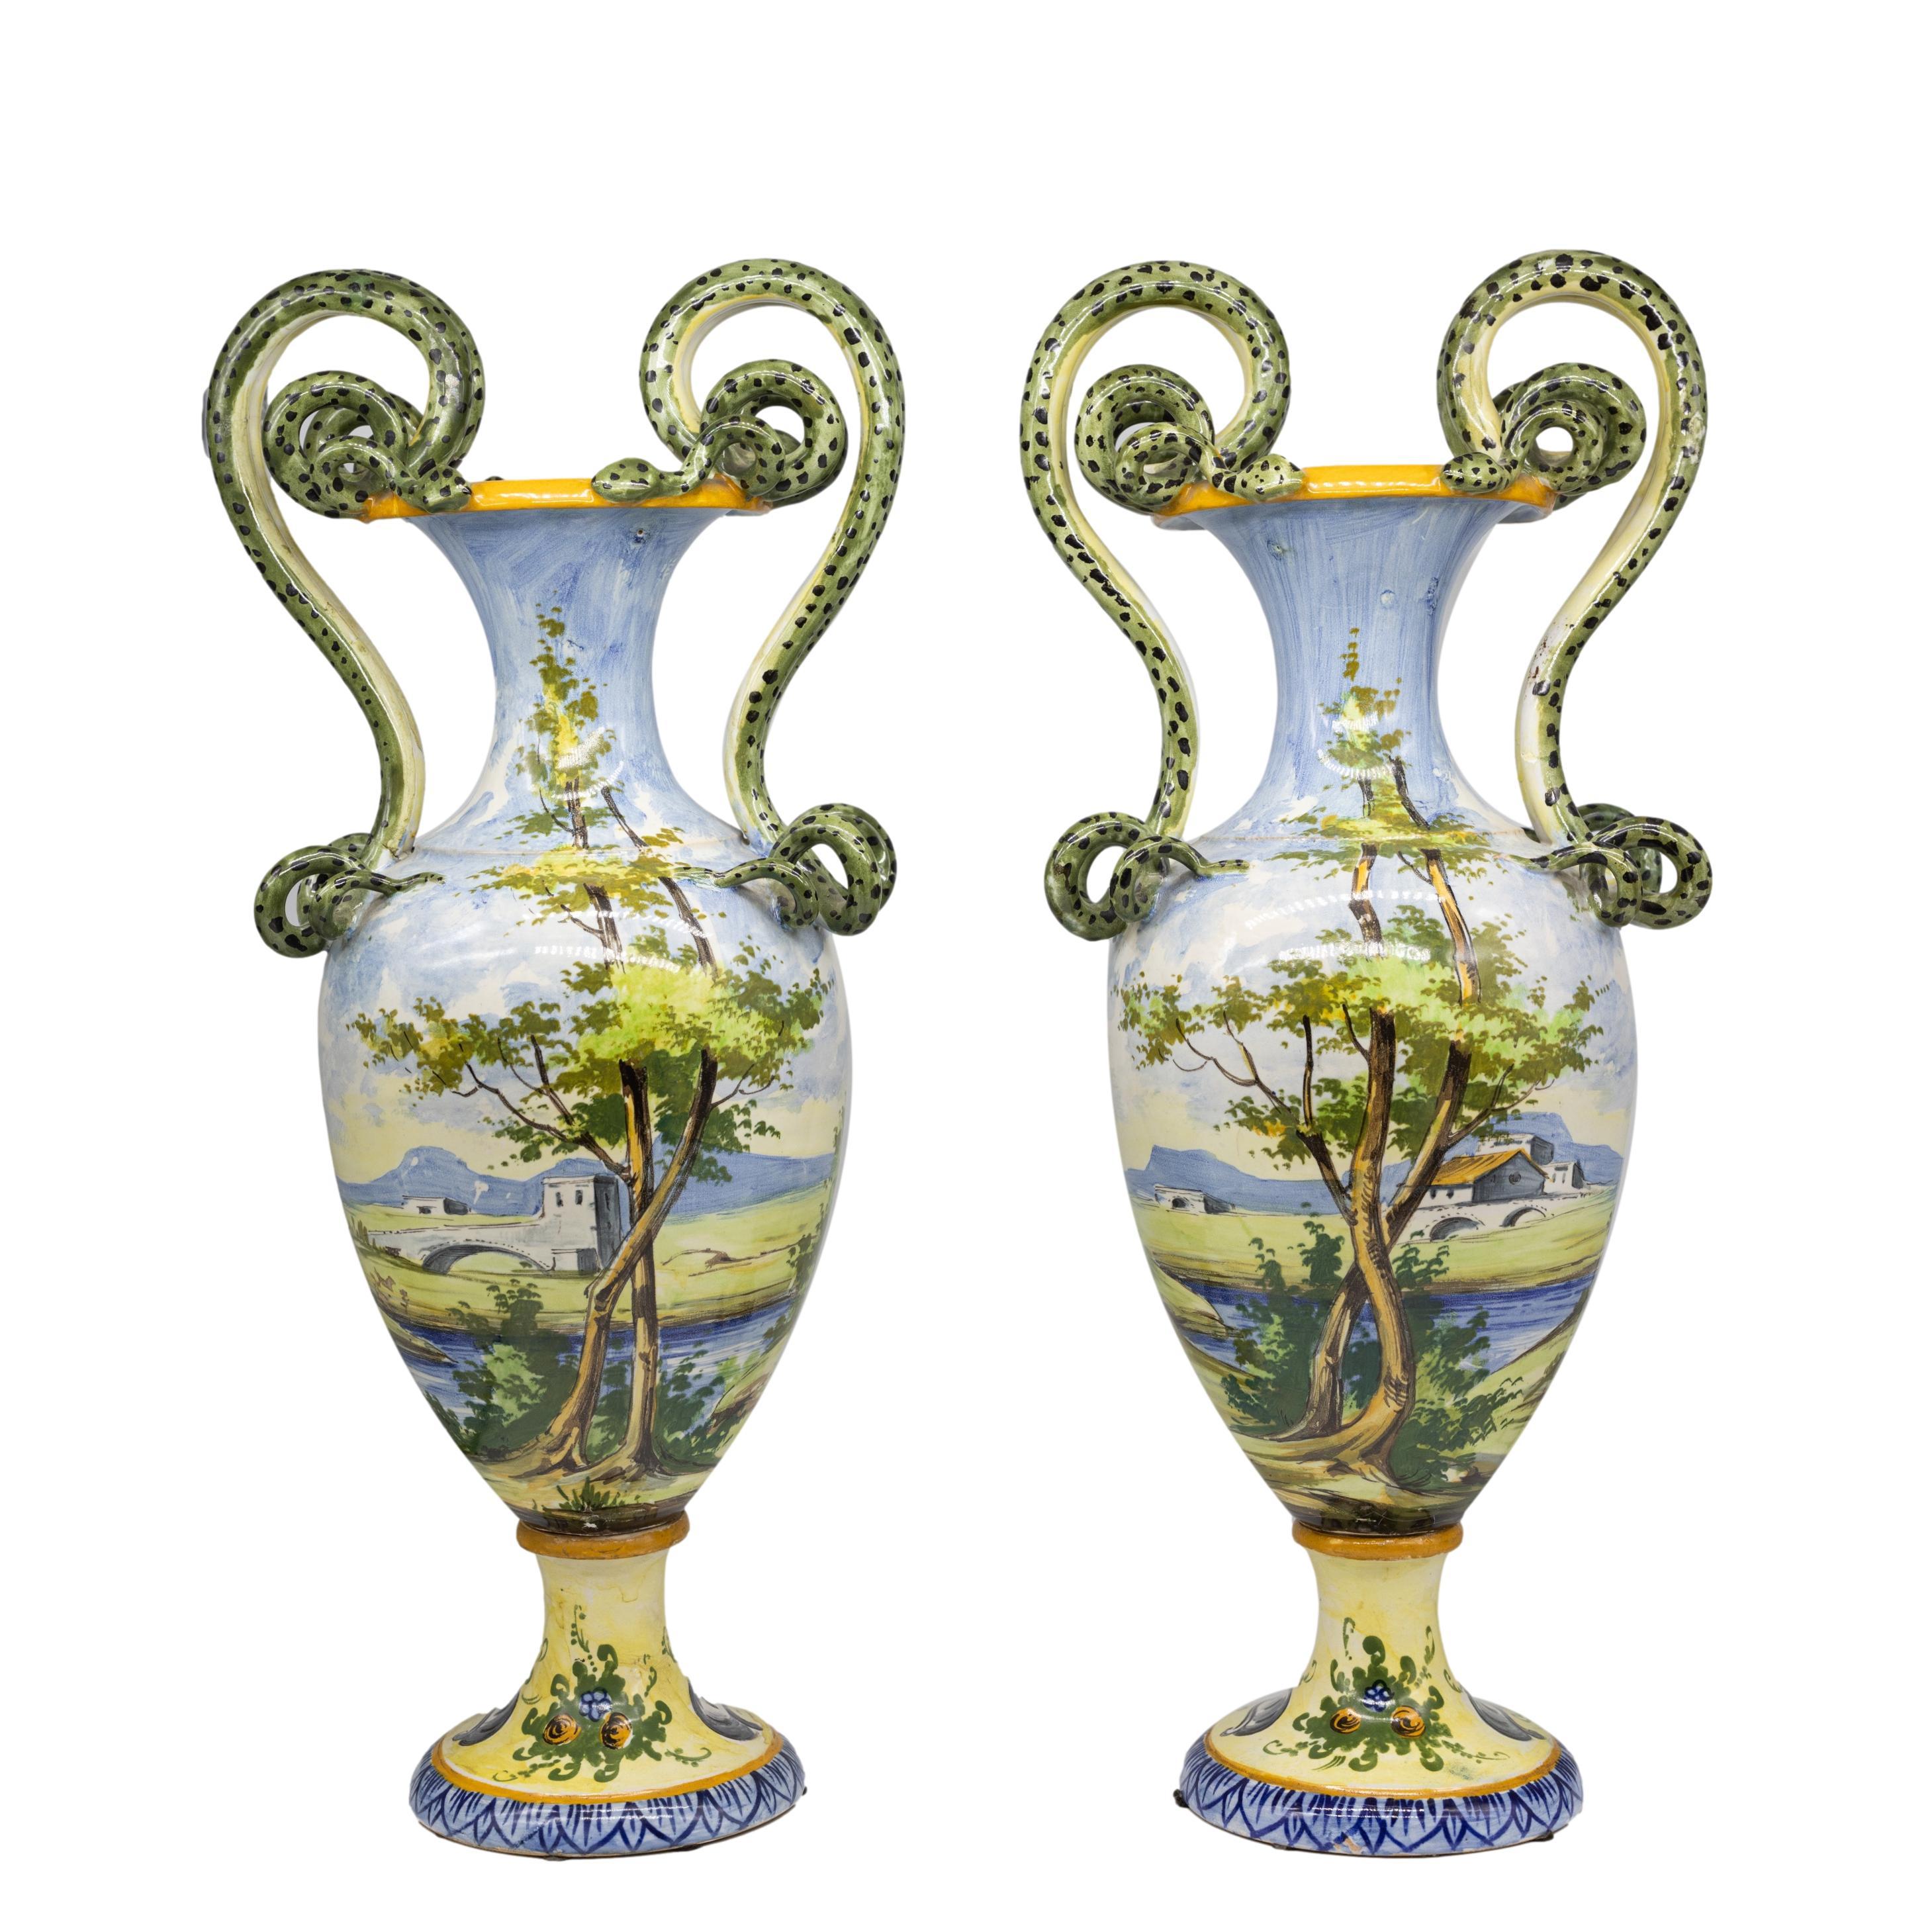 Renaissance Revival Pair of Italian Maiolica Vases, Coiled Snake Handles, Ca. 1880 For Sale